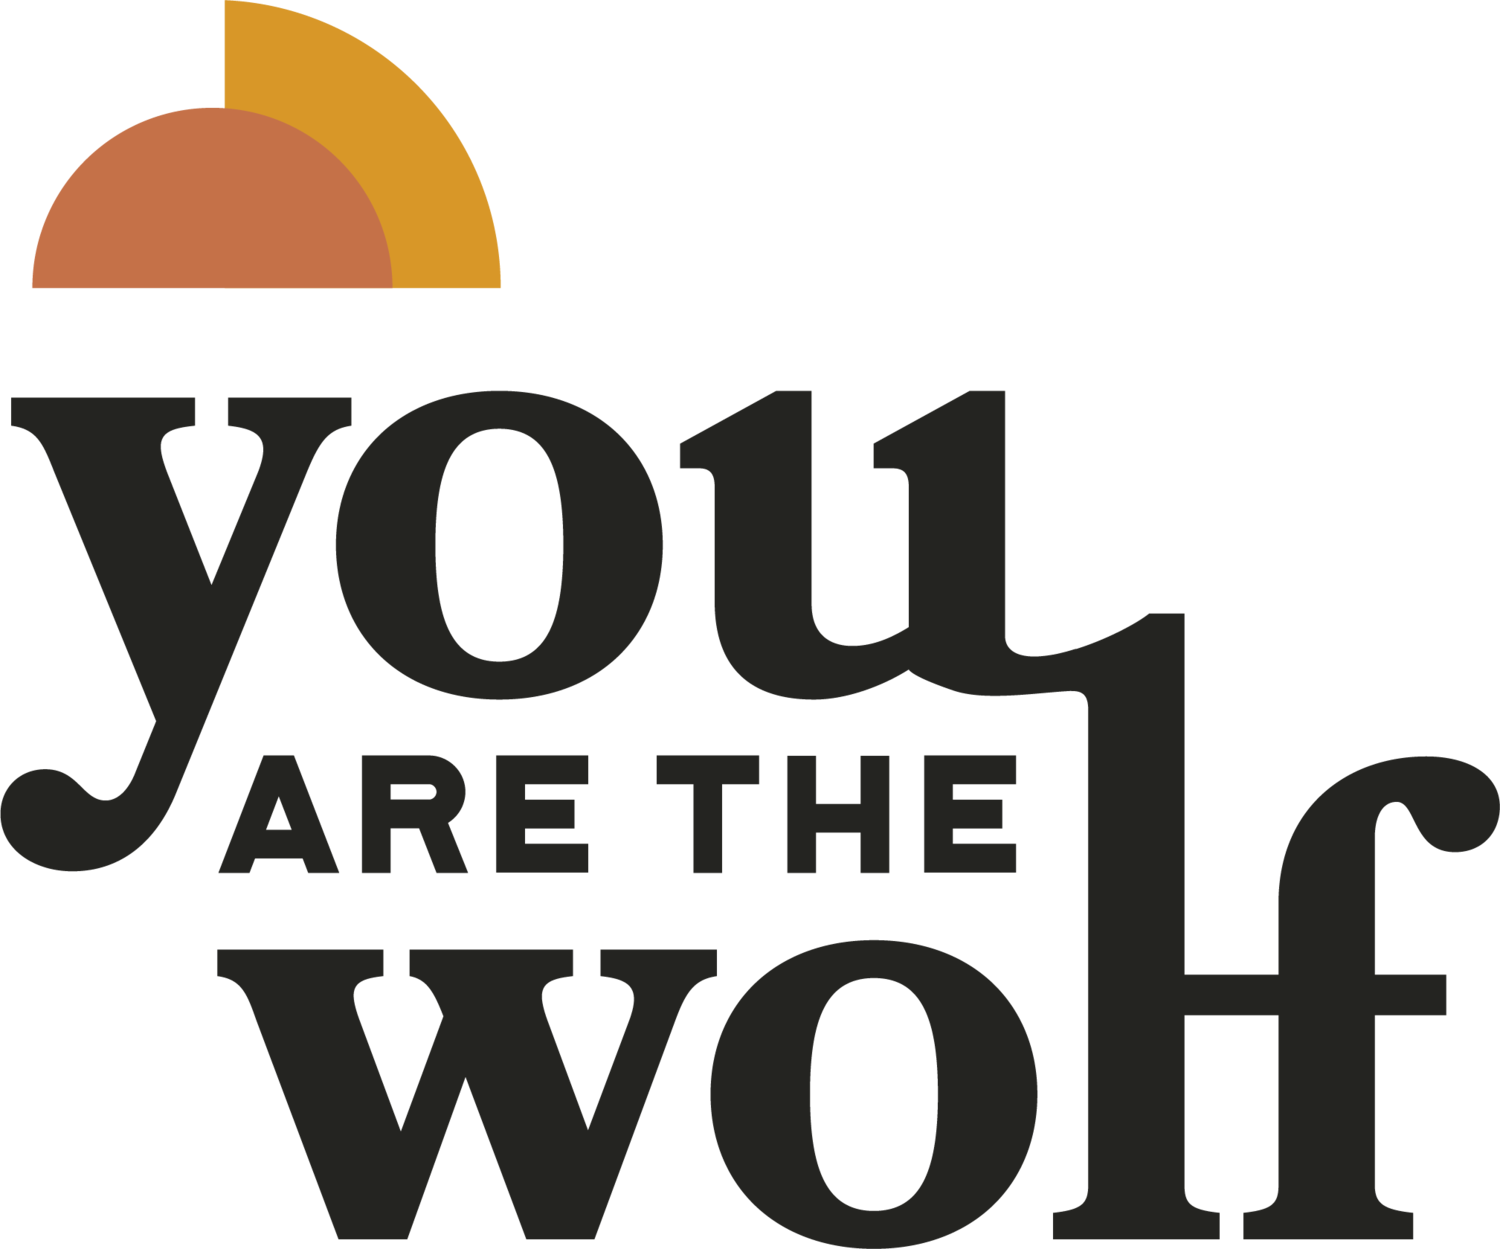 You are the wolf - Apparel for daily reminders